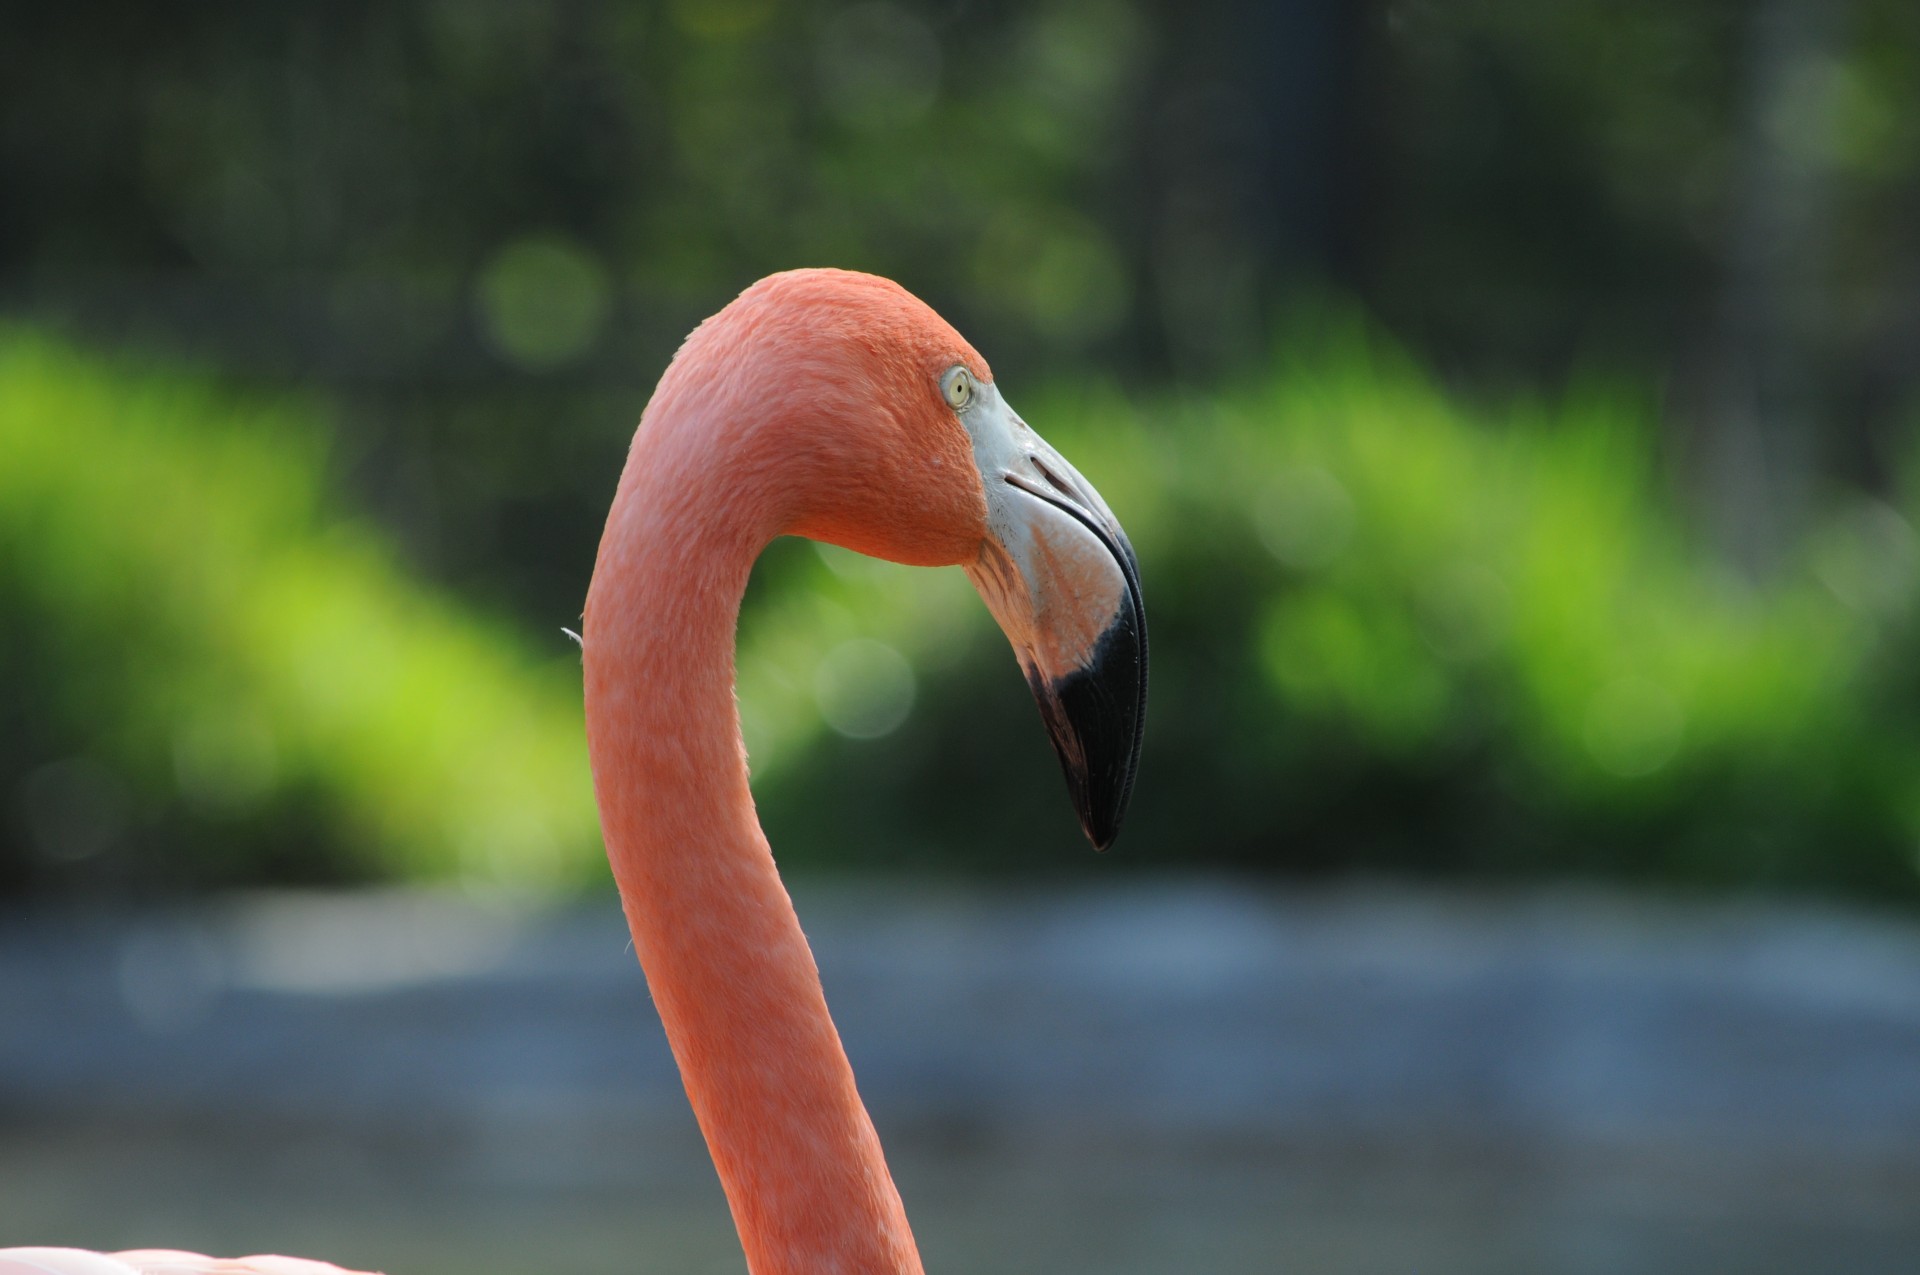 Close-up of a Flamingo's head with a drop of water hanging from its beak